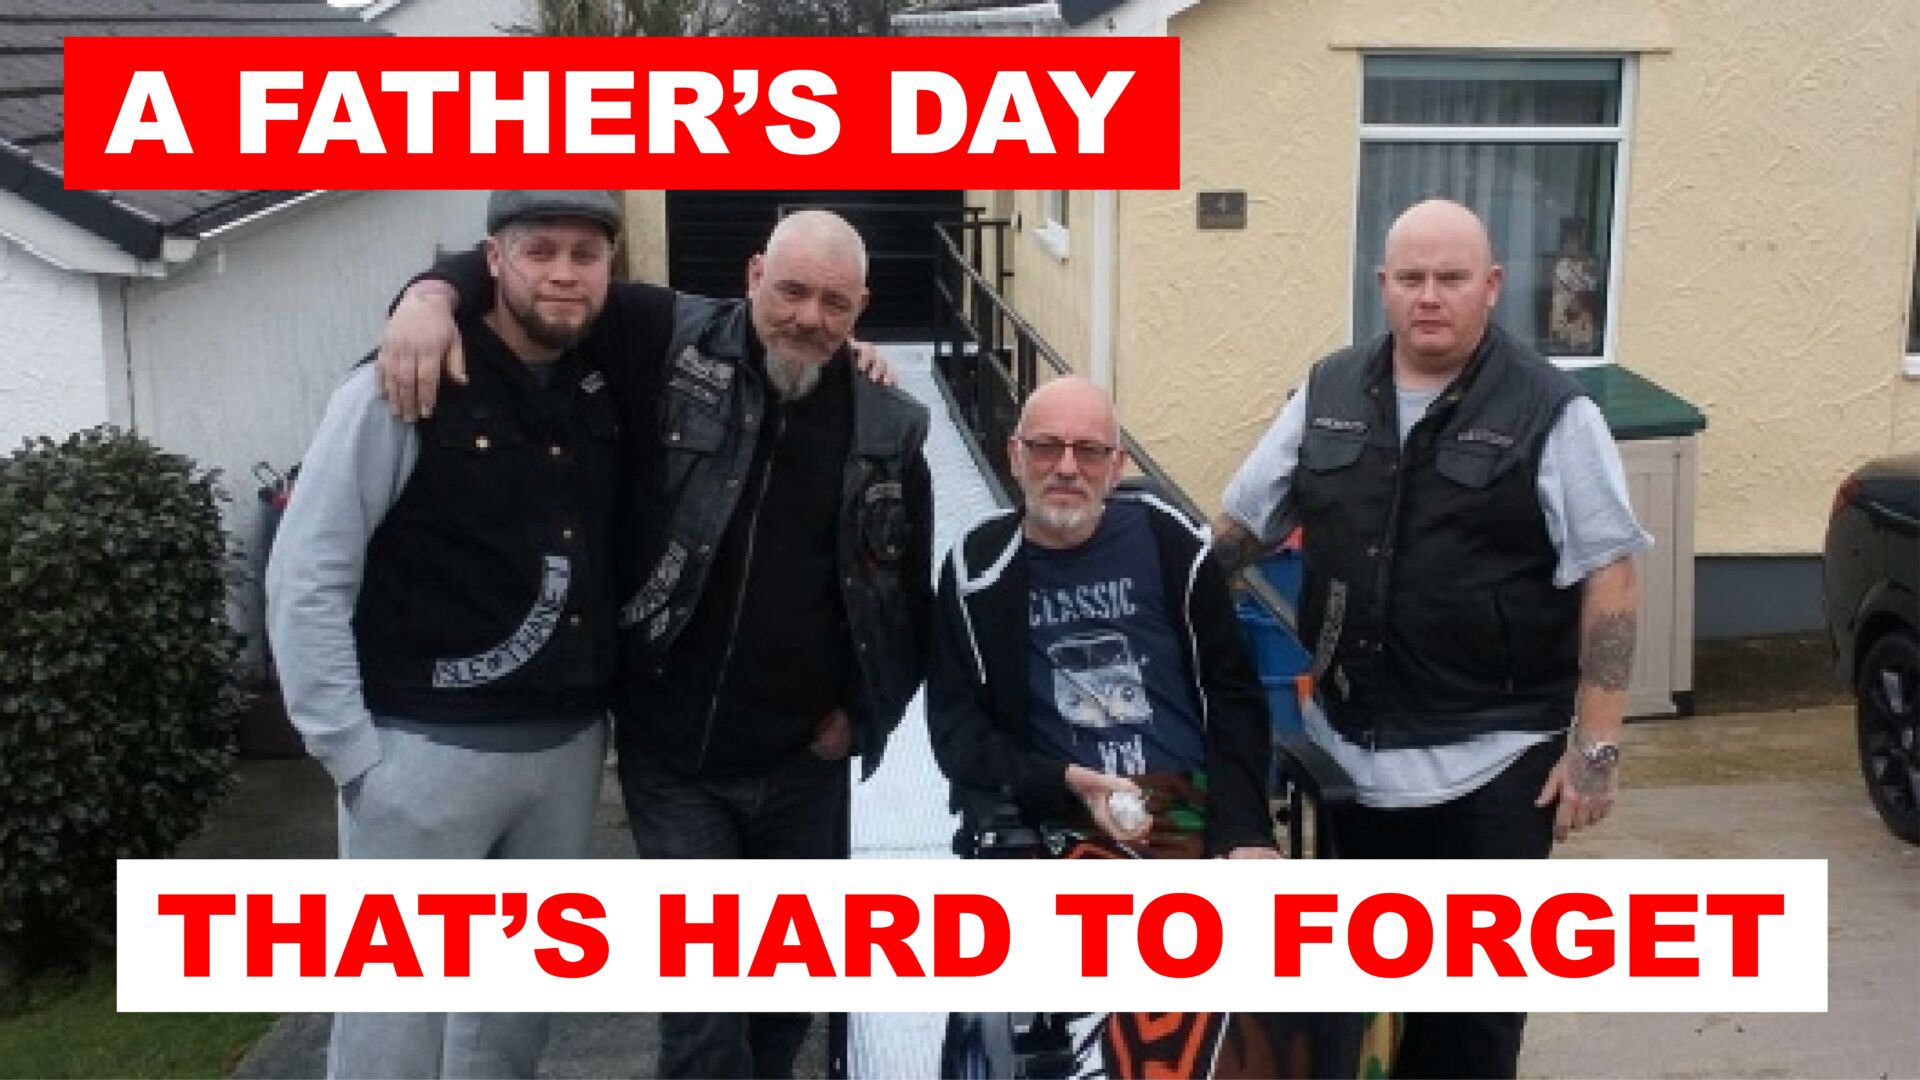 A Father’s Day that’s hard to forget